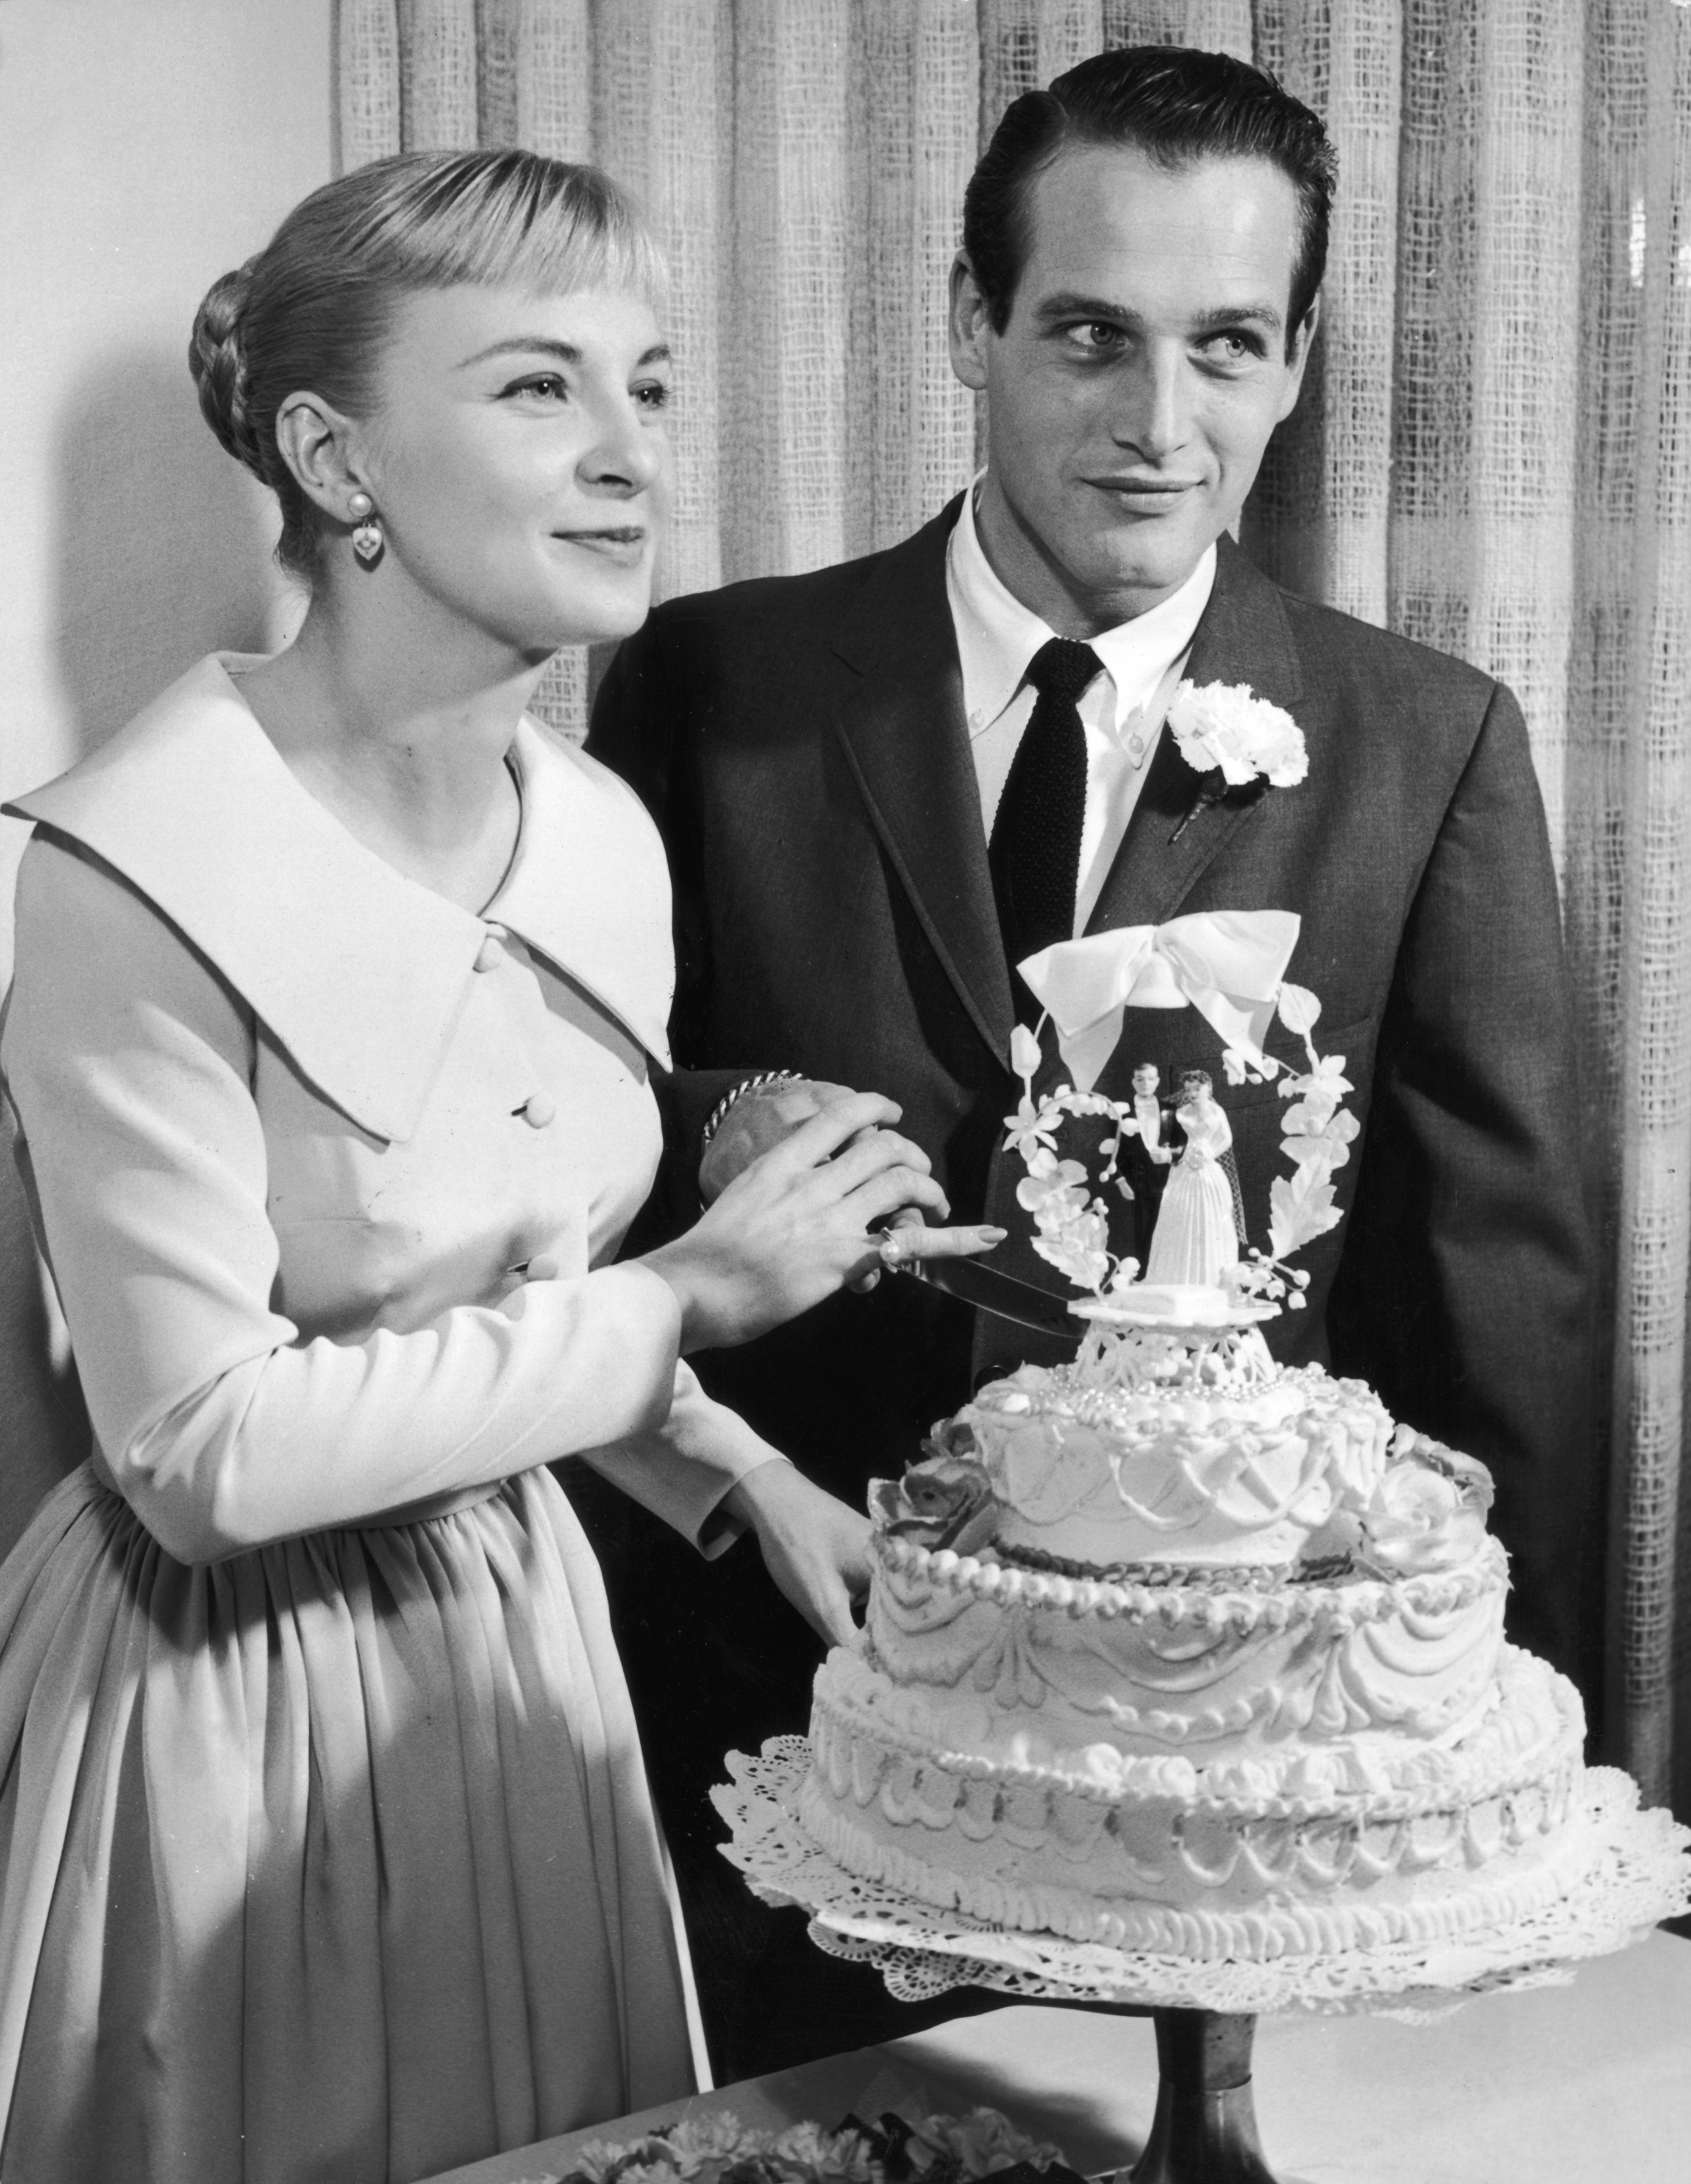  American actors Joanne Woodward and Paul Newman holding a knife together as they prepare to cut into their wedding cake, Las Vegas, Nevada in 1958 | Source: Getty Images